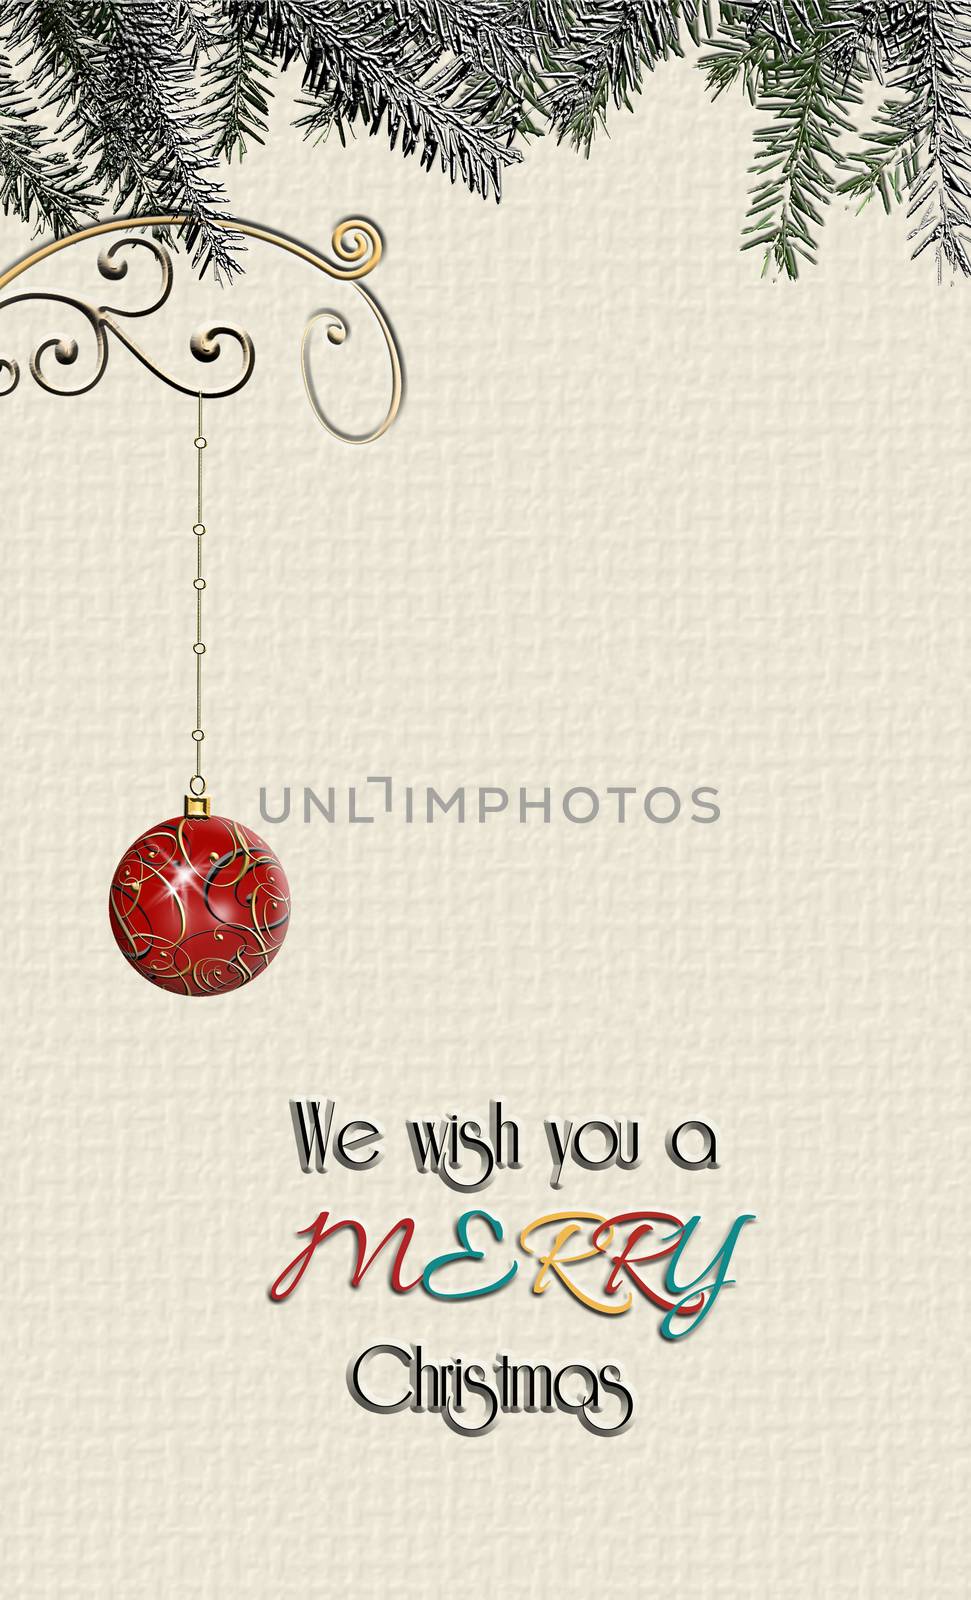 Minimalist Christmas wishes card with text We Wish You a Merry Christmas with hanging red gold bauble on pastel background. Festive minimalist background. 3D illustration